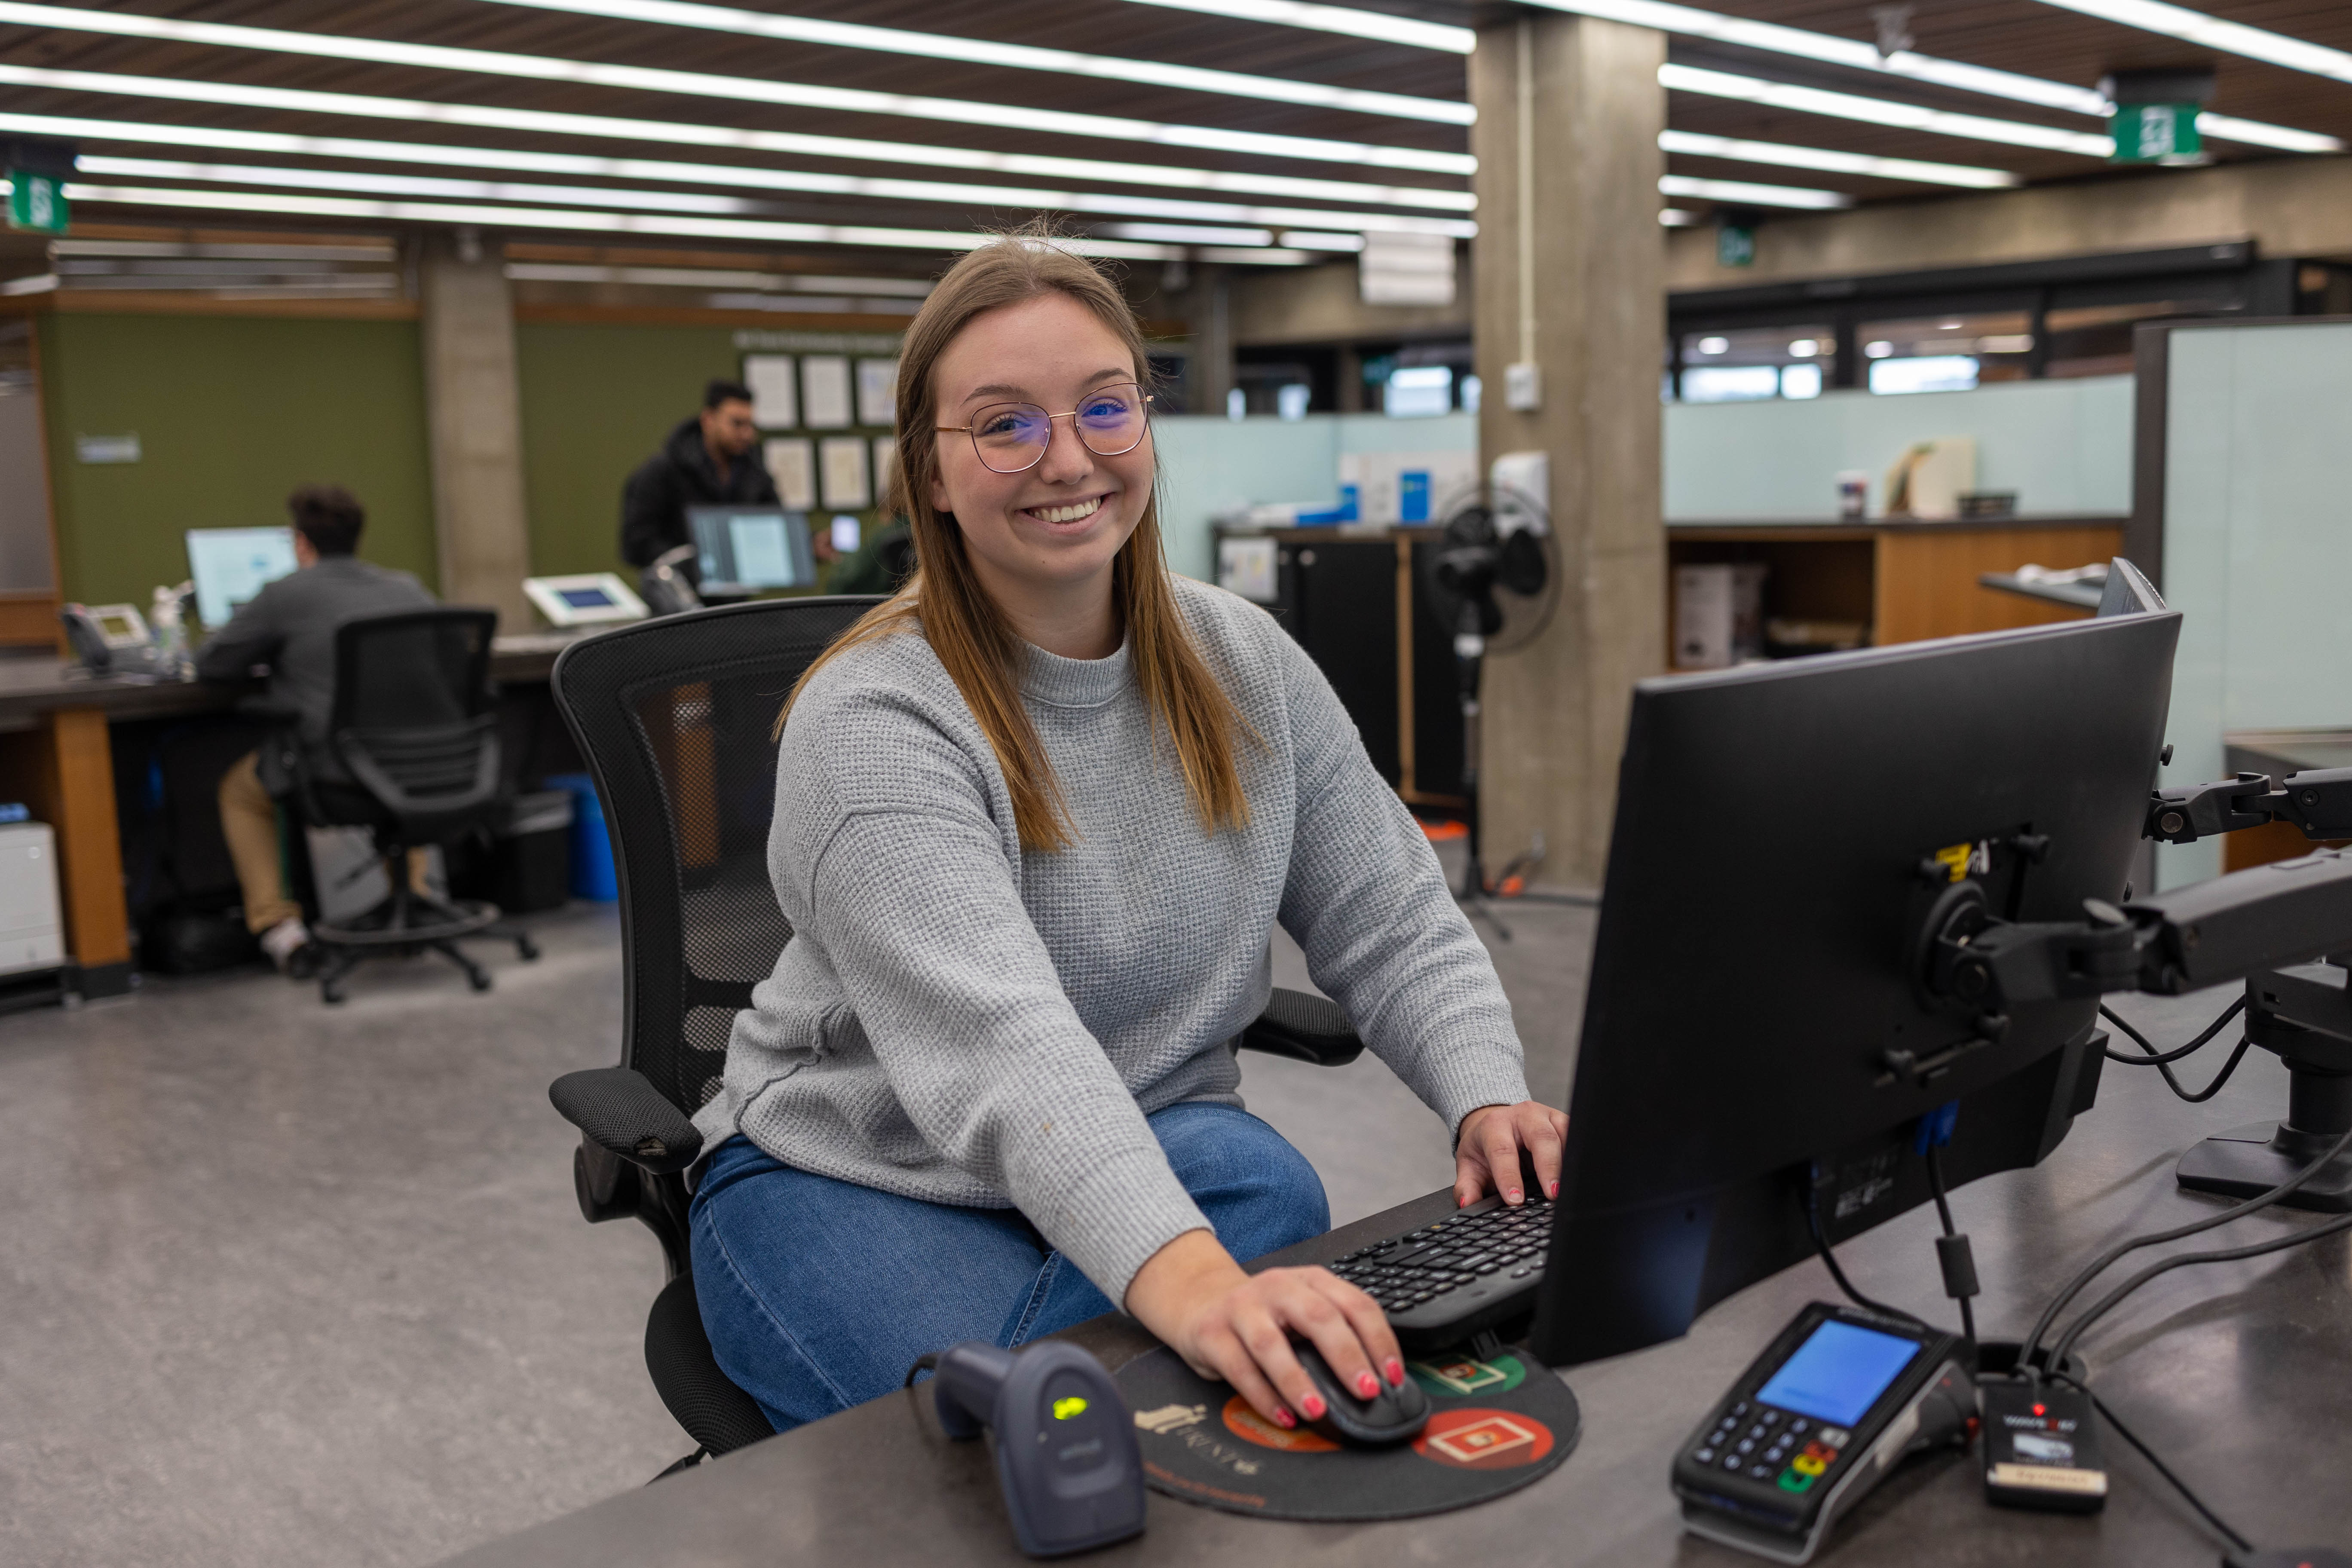 A smiling young woman wearing glasses and a grey sweater sits at a library information desk, working on a computer.